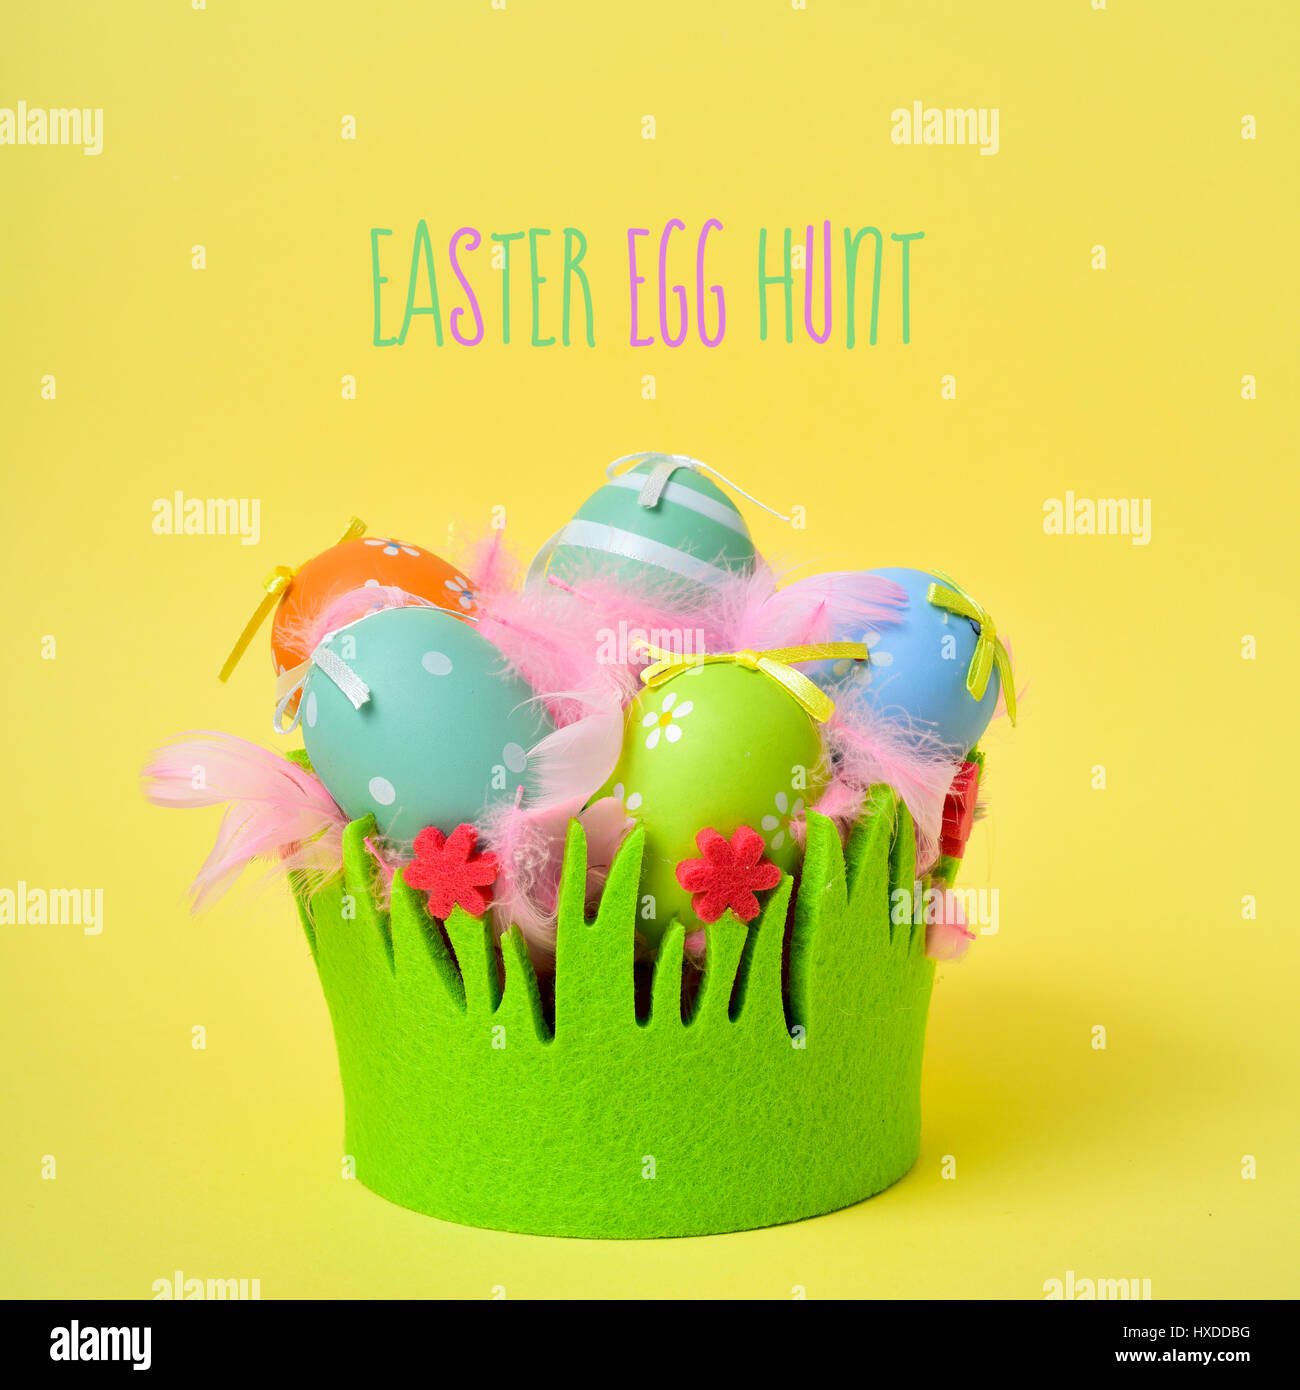 the text text easter egg hunt and a pile of different decorated easter eggs and pink feathers in a basket decorated as grass on a yellow background Stock Photo